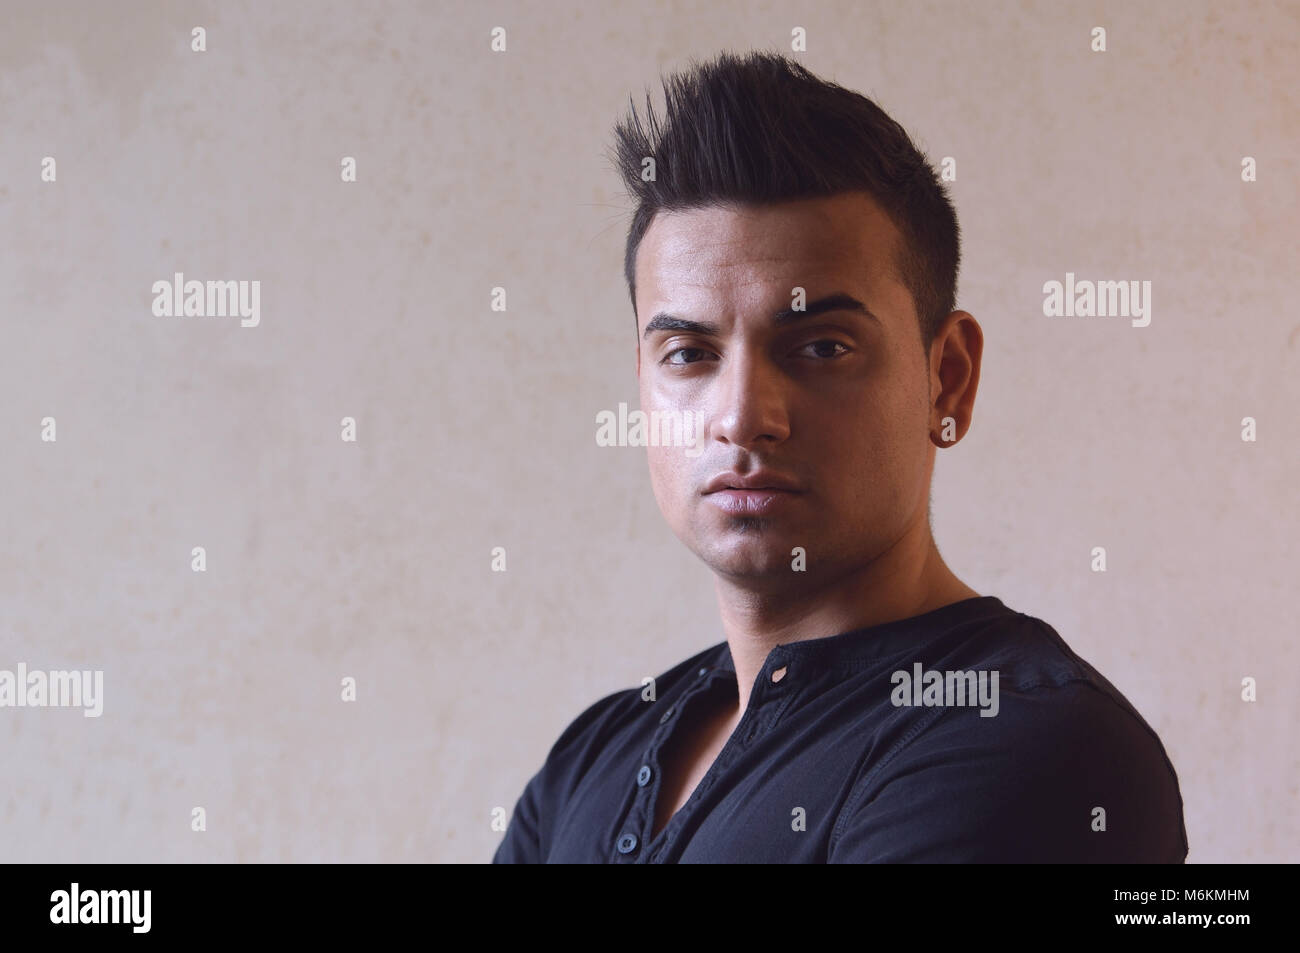 dark moody portrait of cool young turkish man with spiky hair Stock Photo